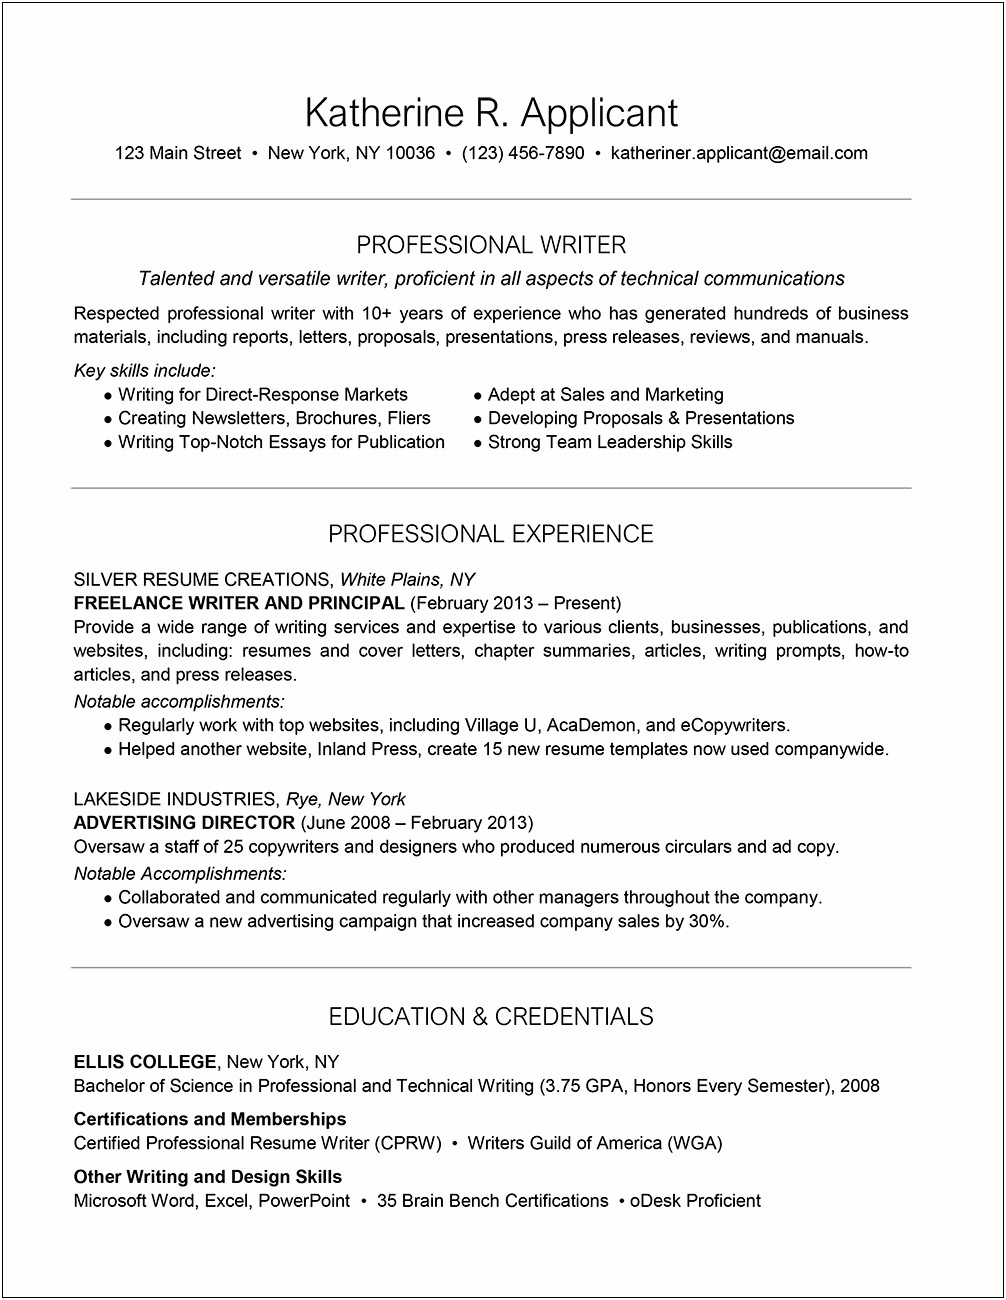 Best High Tech Resume Posting Services